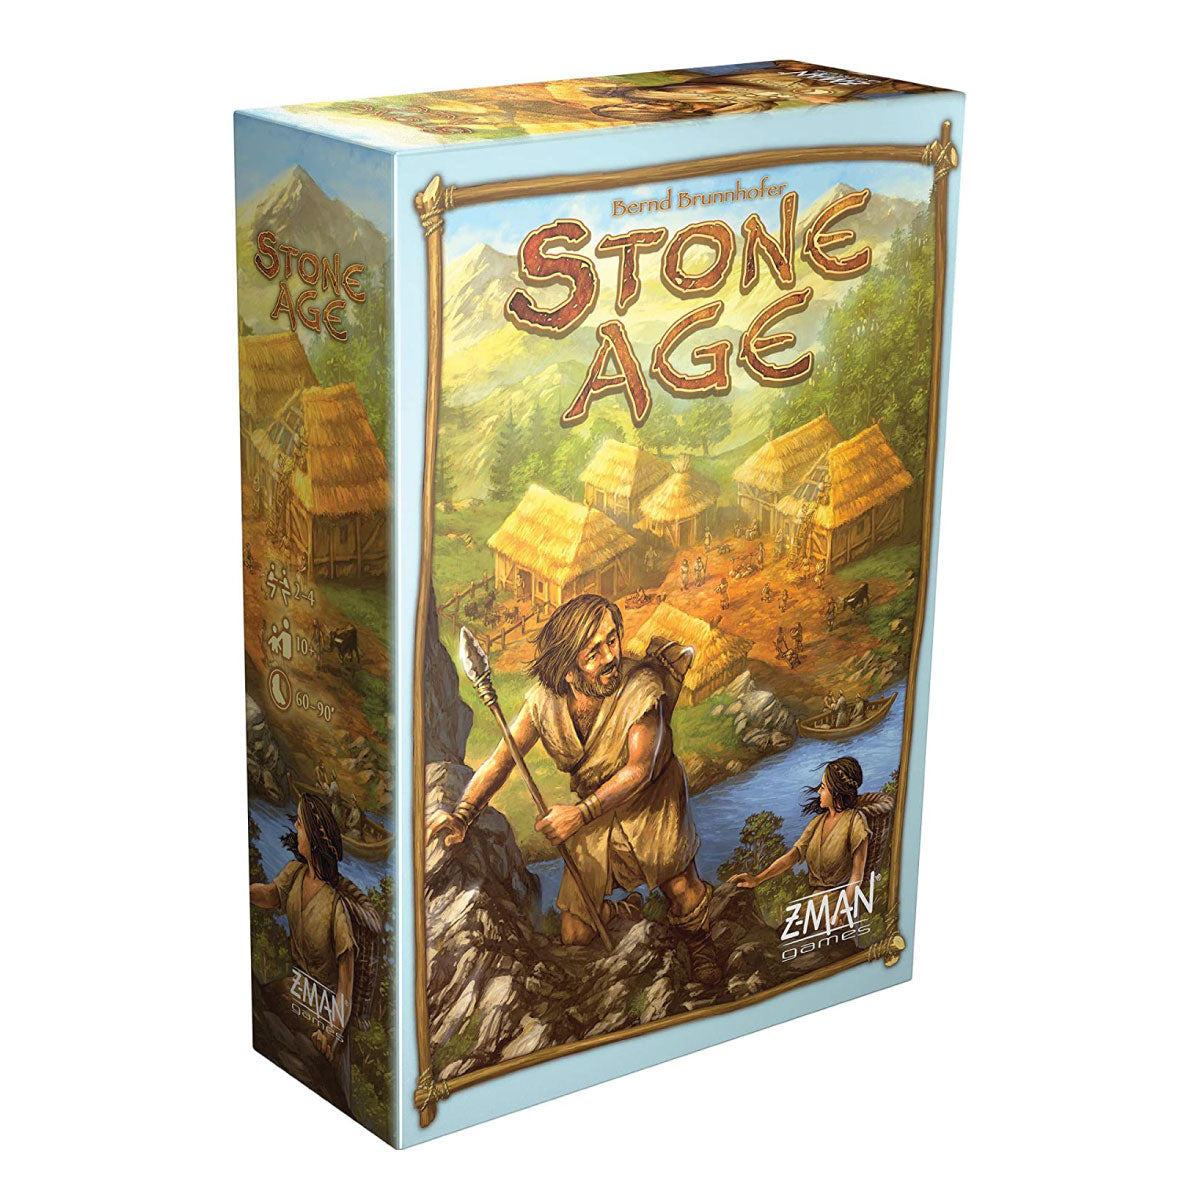 Stone Age from Z-Man Games